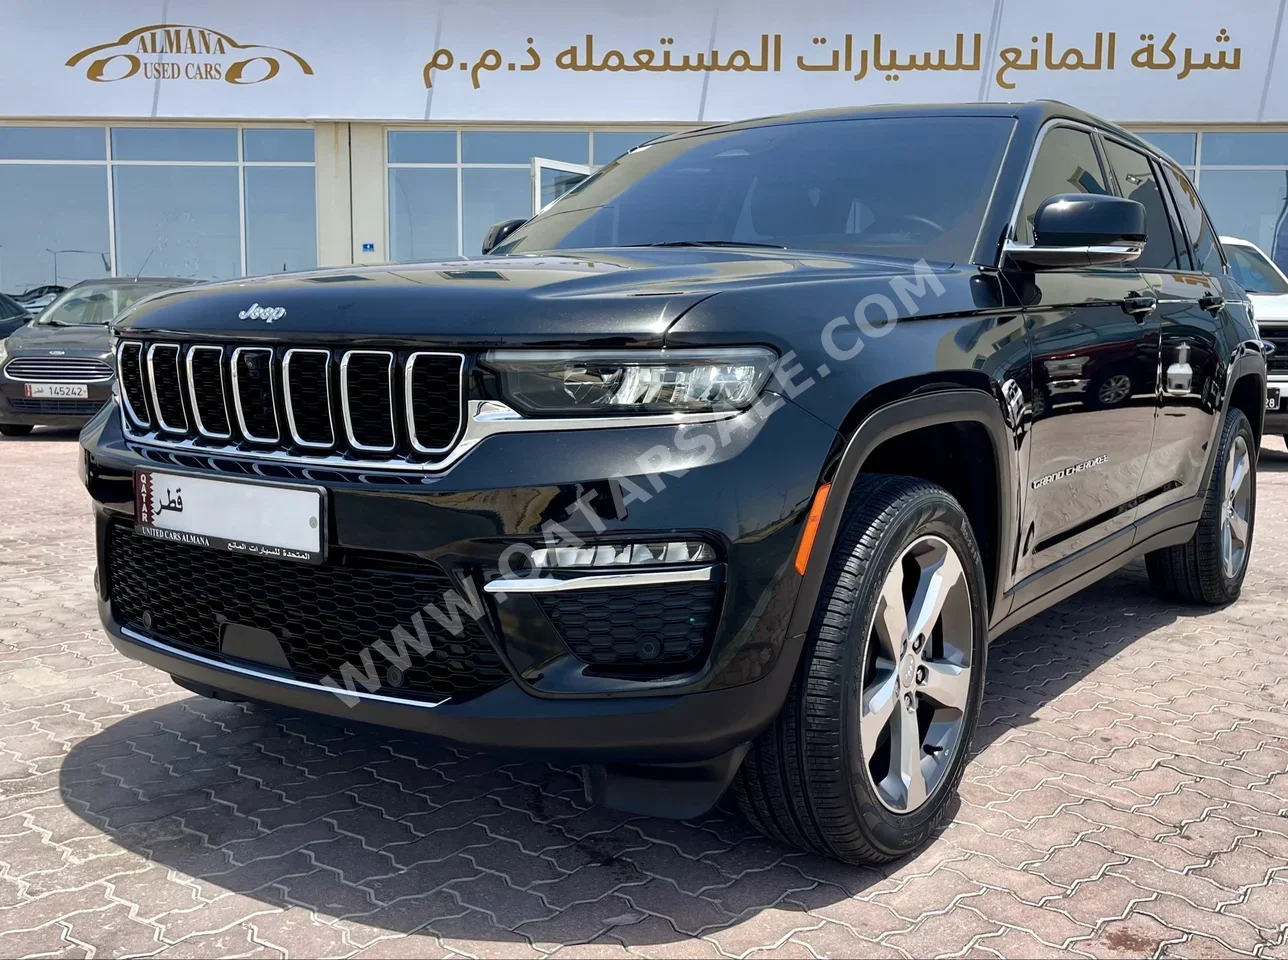 Jeep  Grand Cherokee  Limited  2022  Automatic  12,000 Km  6 Cylinder  Four Wheel Drive (4WD)  SUV  Black  With Warranty